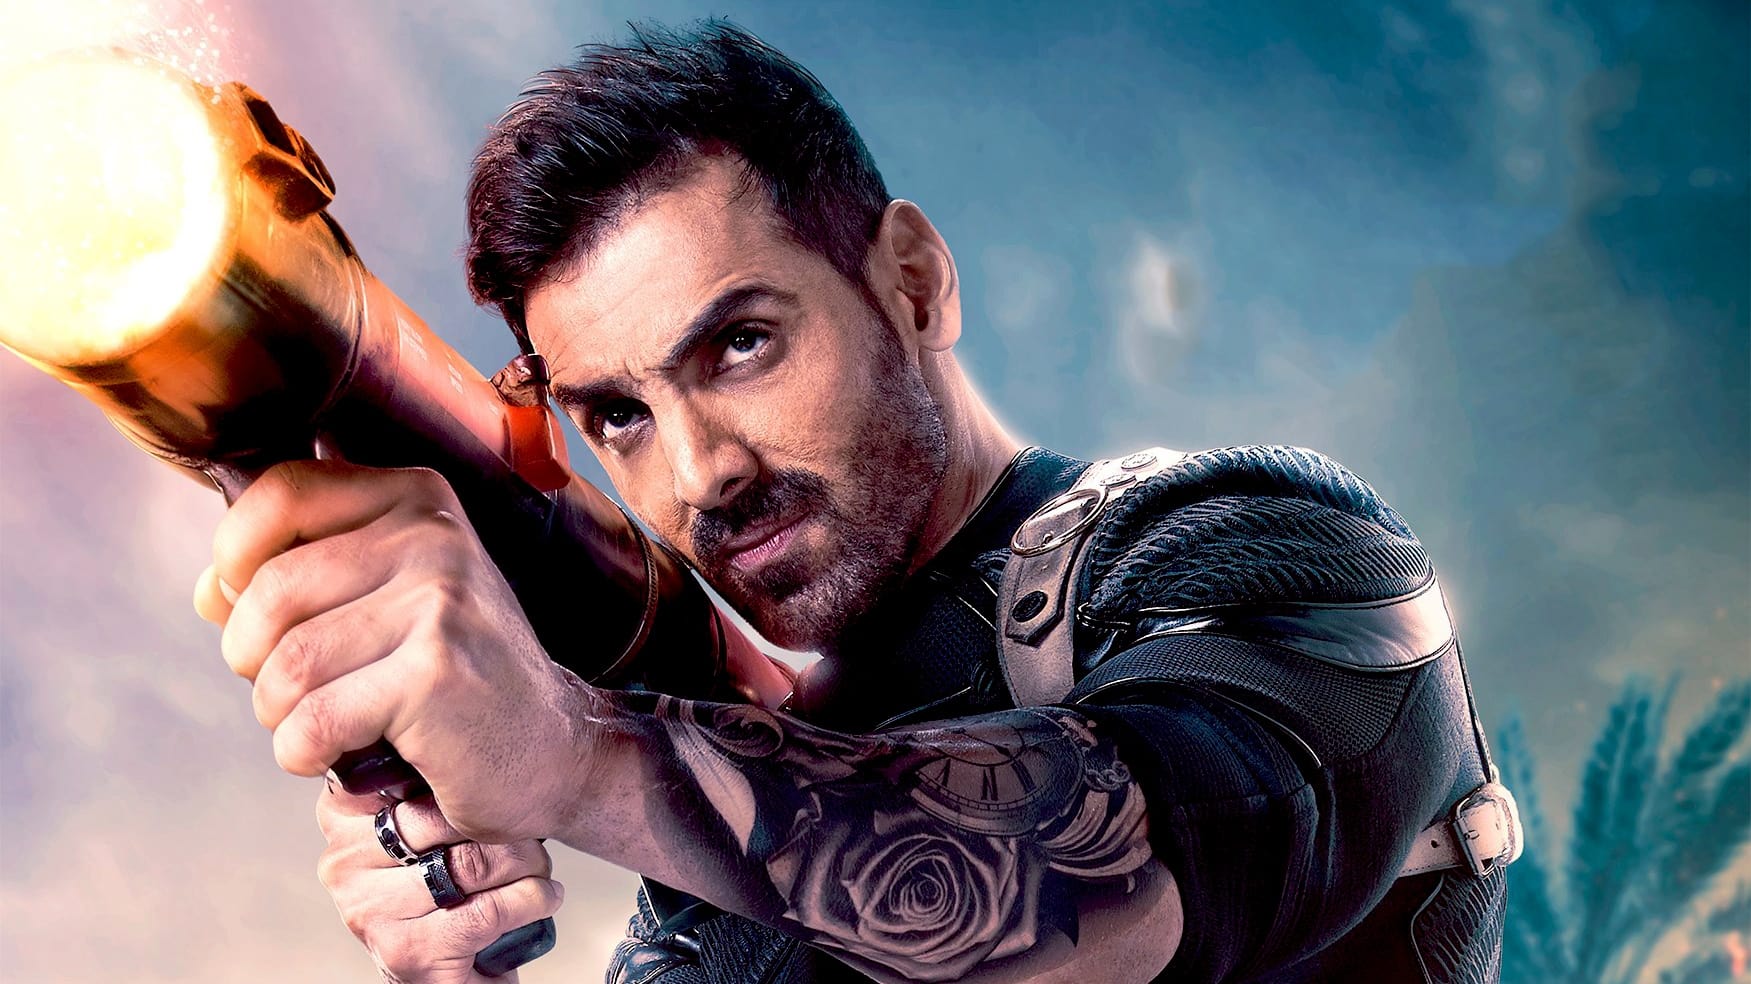 John Abraham in Pathan holding a rocket launcher in his hand